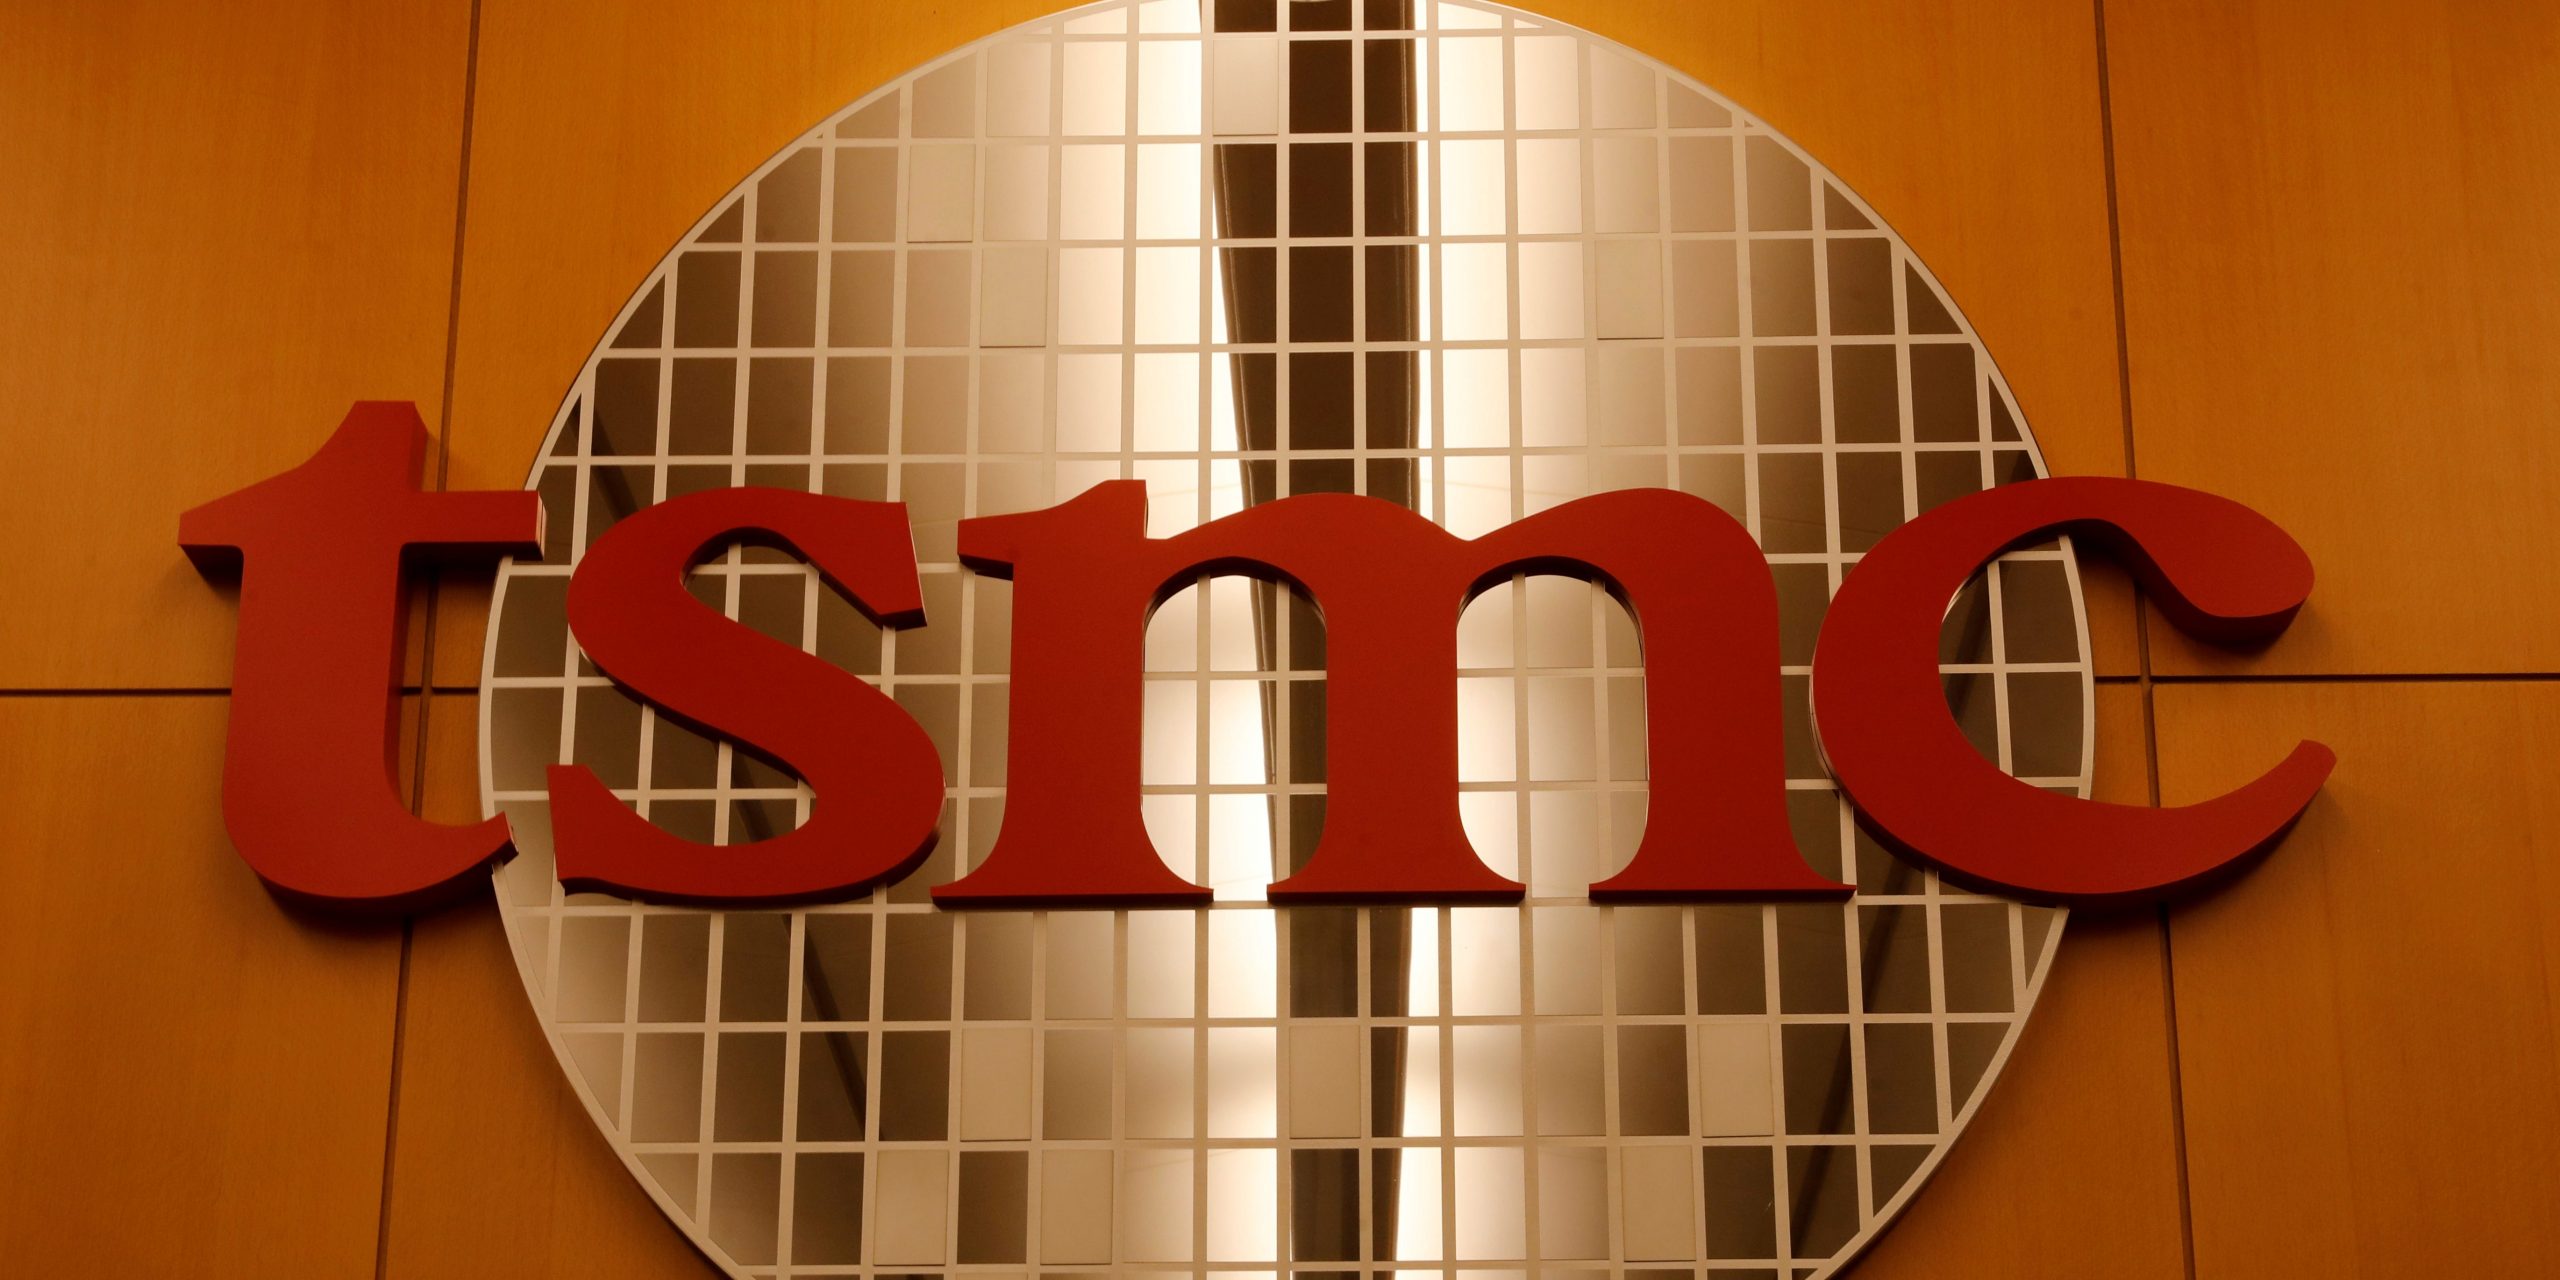 FILE PHOTO: A logo of Taiwan Semiconductor Manufacturing Co (TSMC) is seen at its headquarters in Hsinchu, Taiwan, Aug. 31, 2018. REUTERS/Tyrone Siu/File Photo